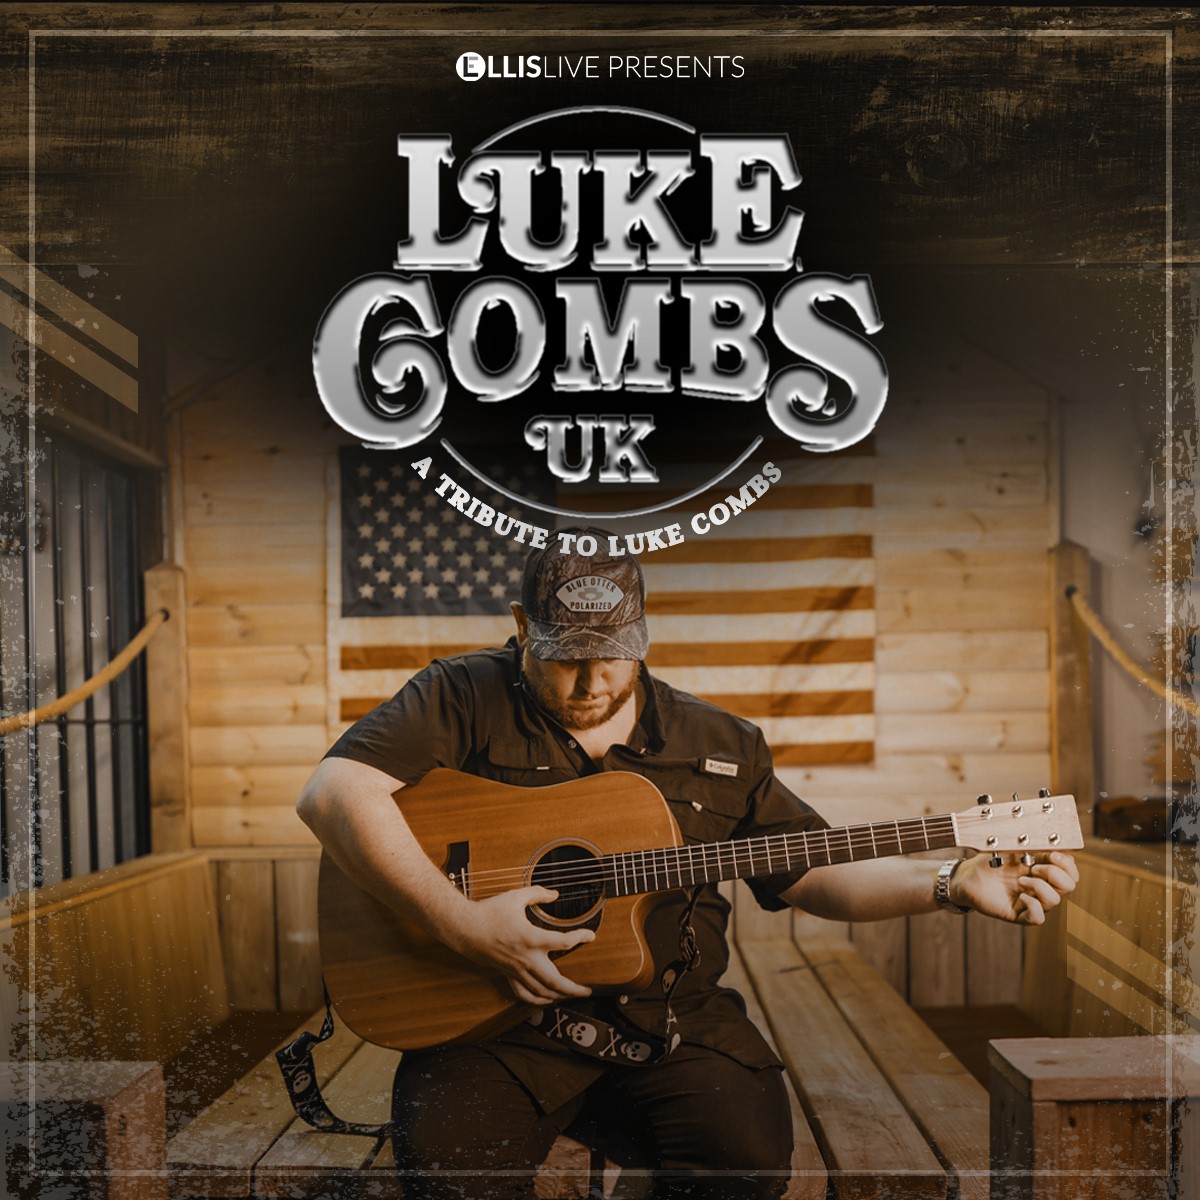 LUKE COMBS UK - A Tribute To Luke Combs  on Jan 31, 19:30@Standard capacity - Pick a seat, Buy tickets and Get information on Sutton Coldfield Town Hall 